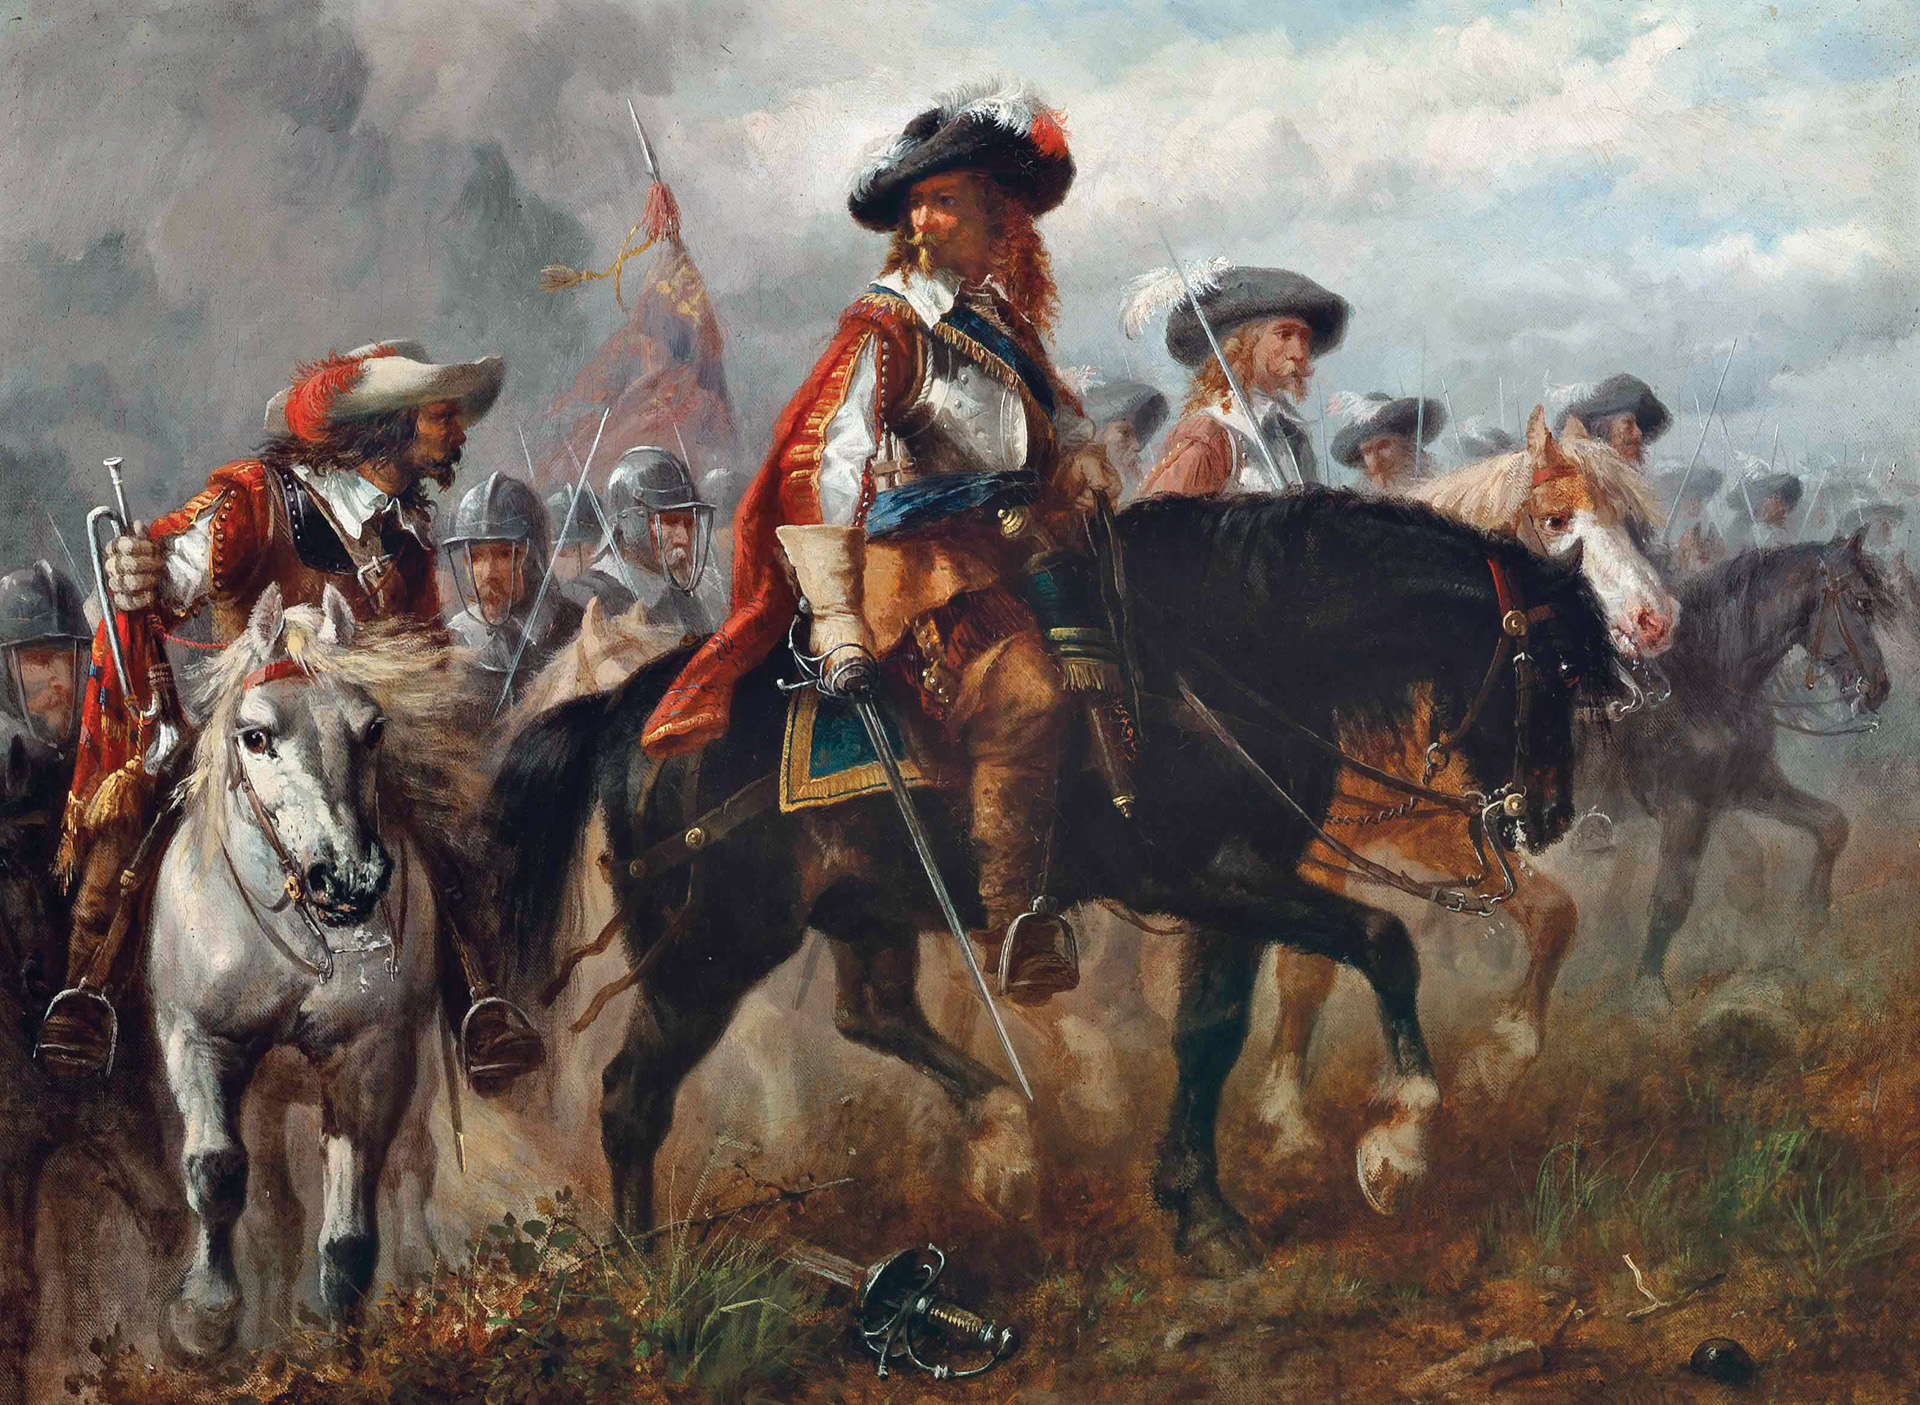 Rupert's foolhardy decision to pursue retreating Roundhead cavalry, rather than staying on the field of battle, forced King Charles to consider leading a counterattack with his Lifeguard horsemen. But the king was unwilling to risk everything, including his life.